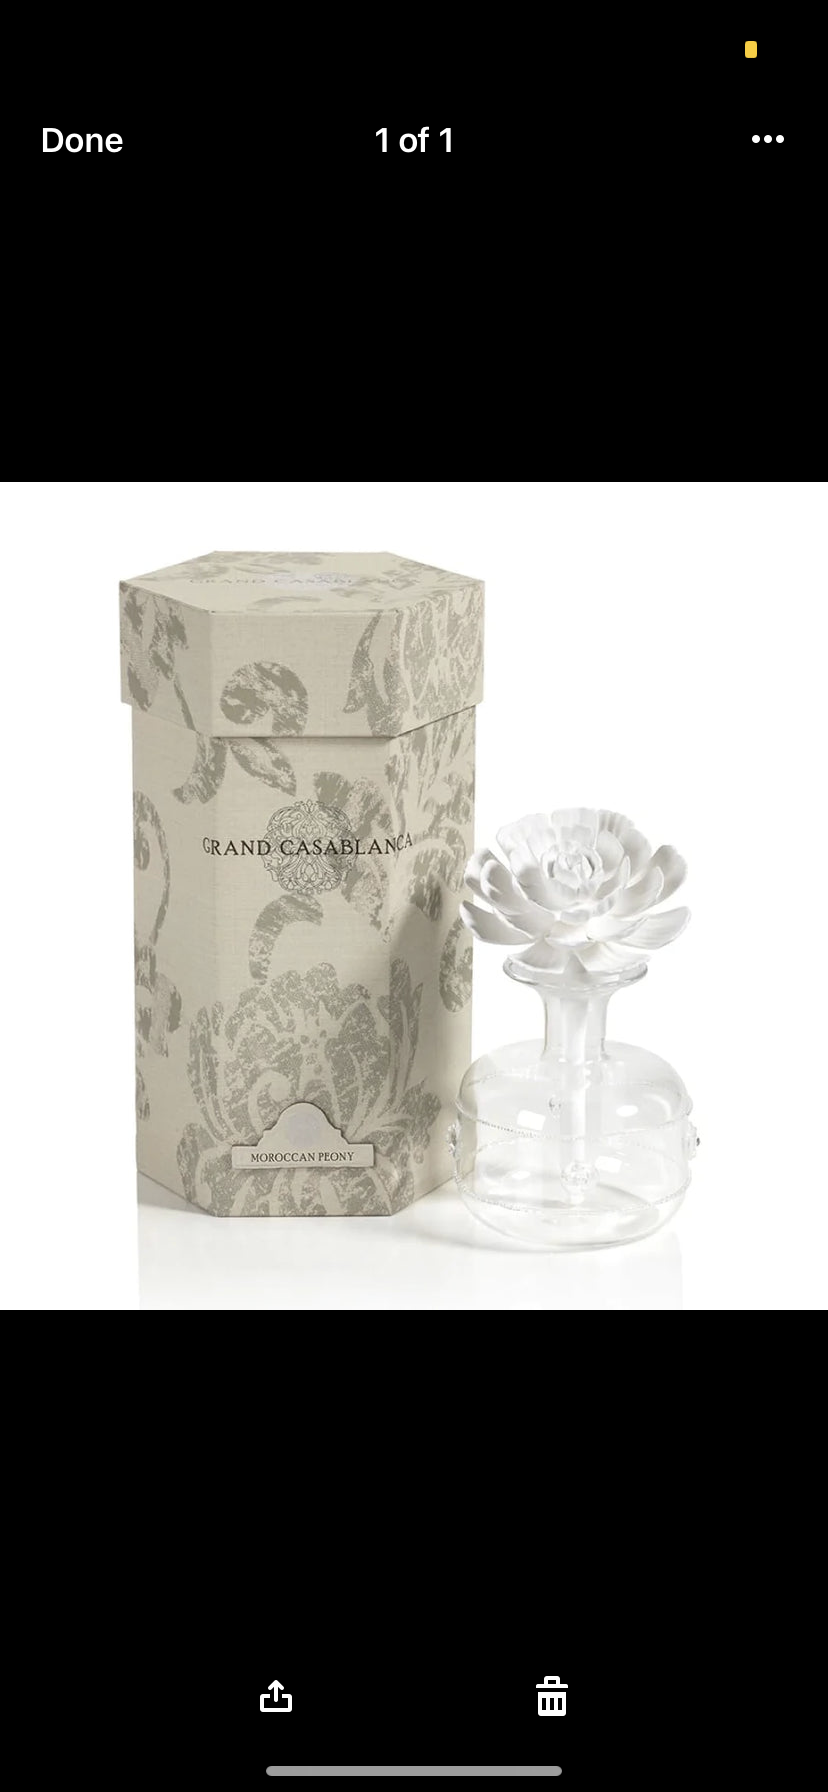 GRAND CASABLANCA PORCELAIN DIFFUSER - MOROCCAN PEONY BY ZODAX